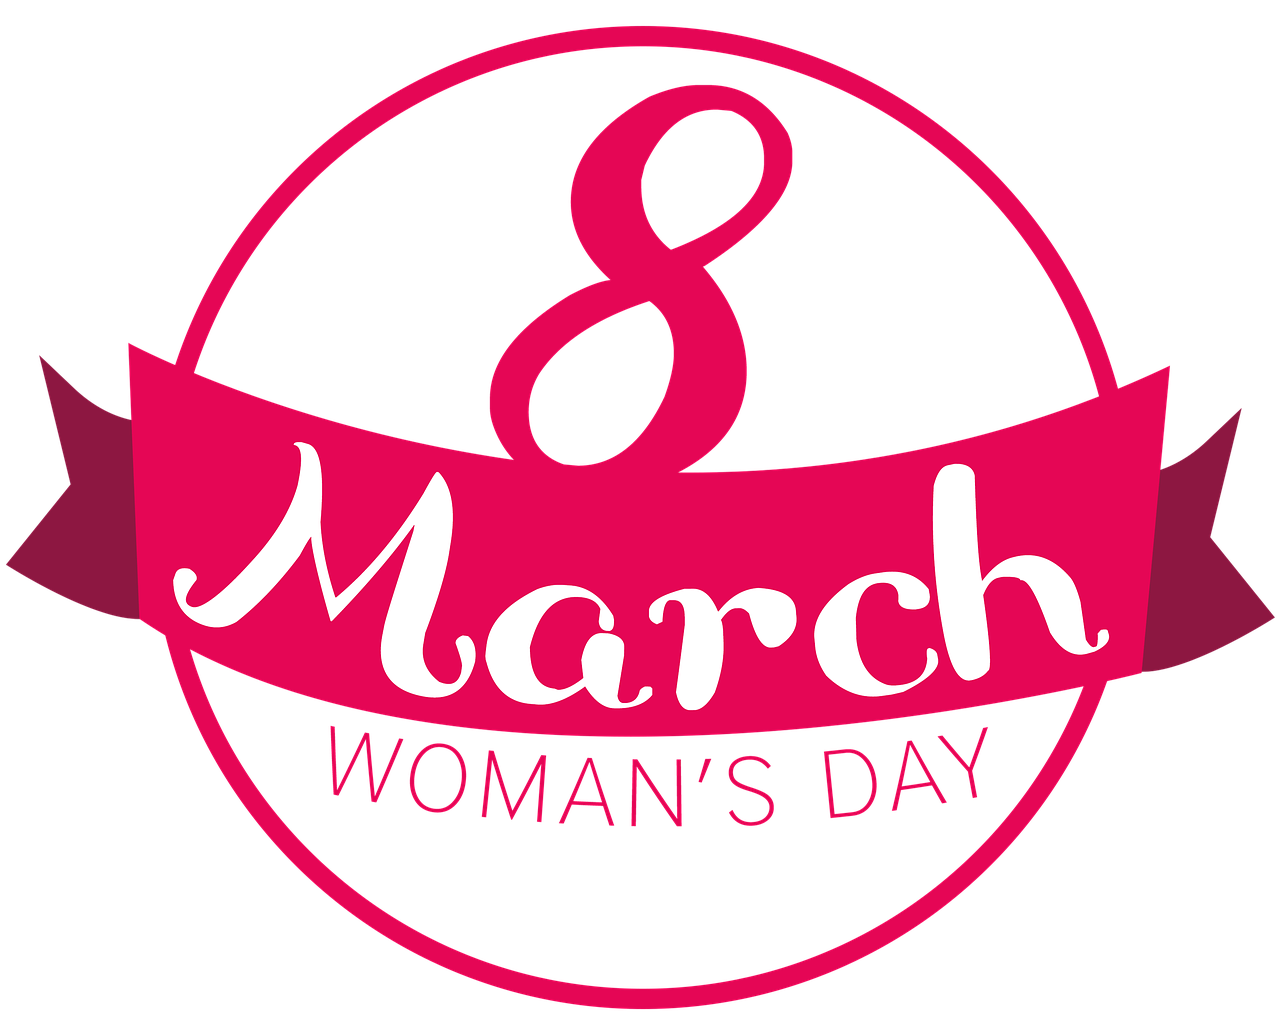 women's day 8 march 8 free photo